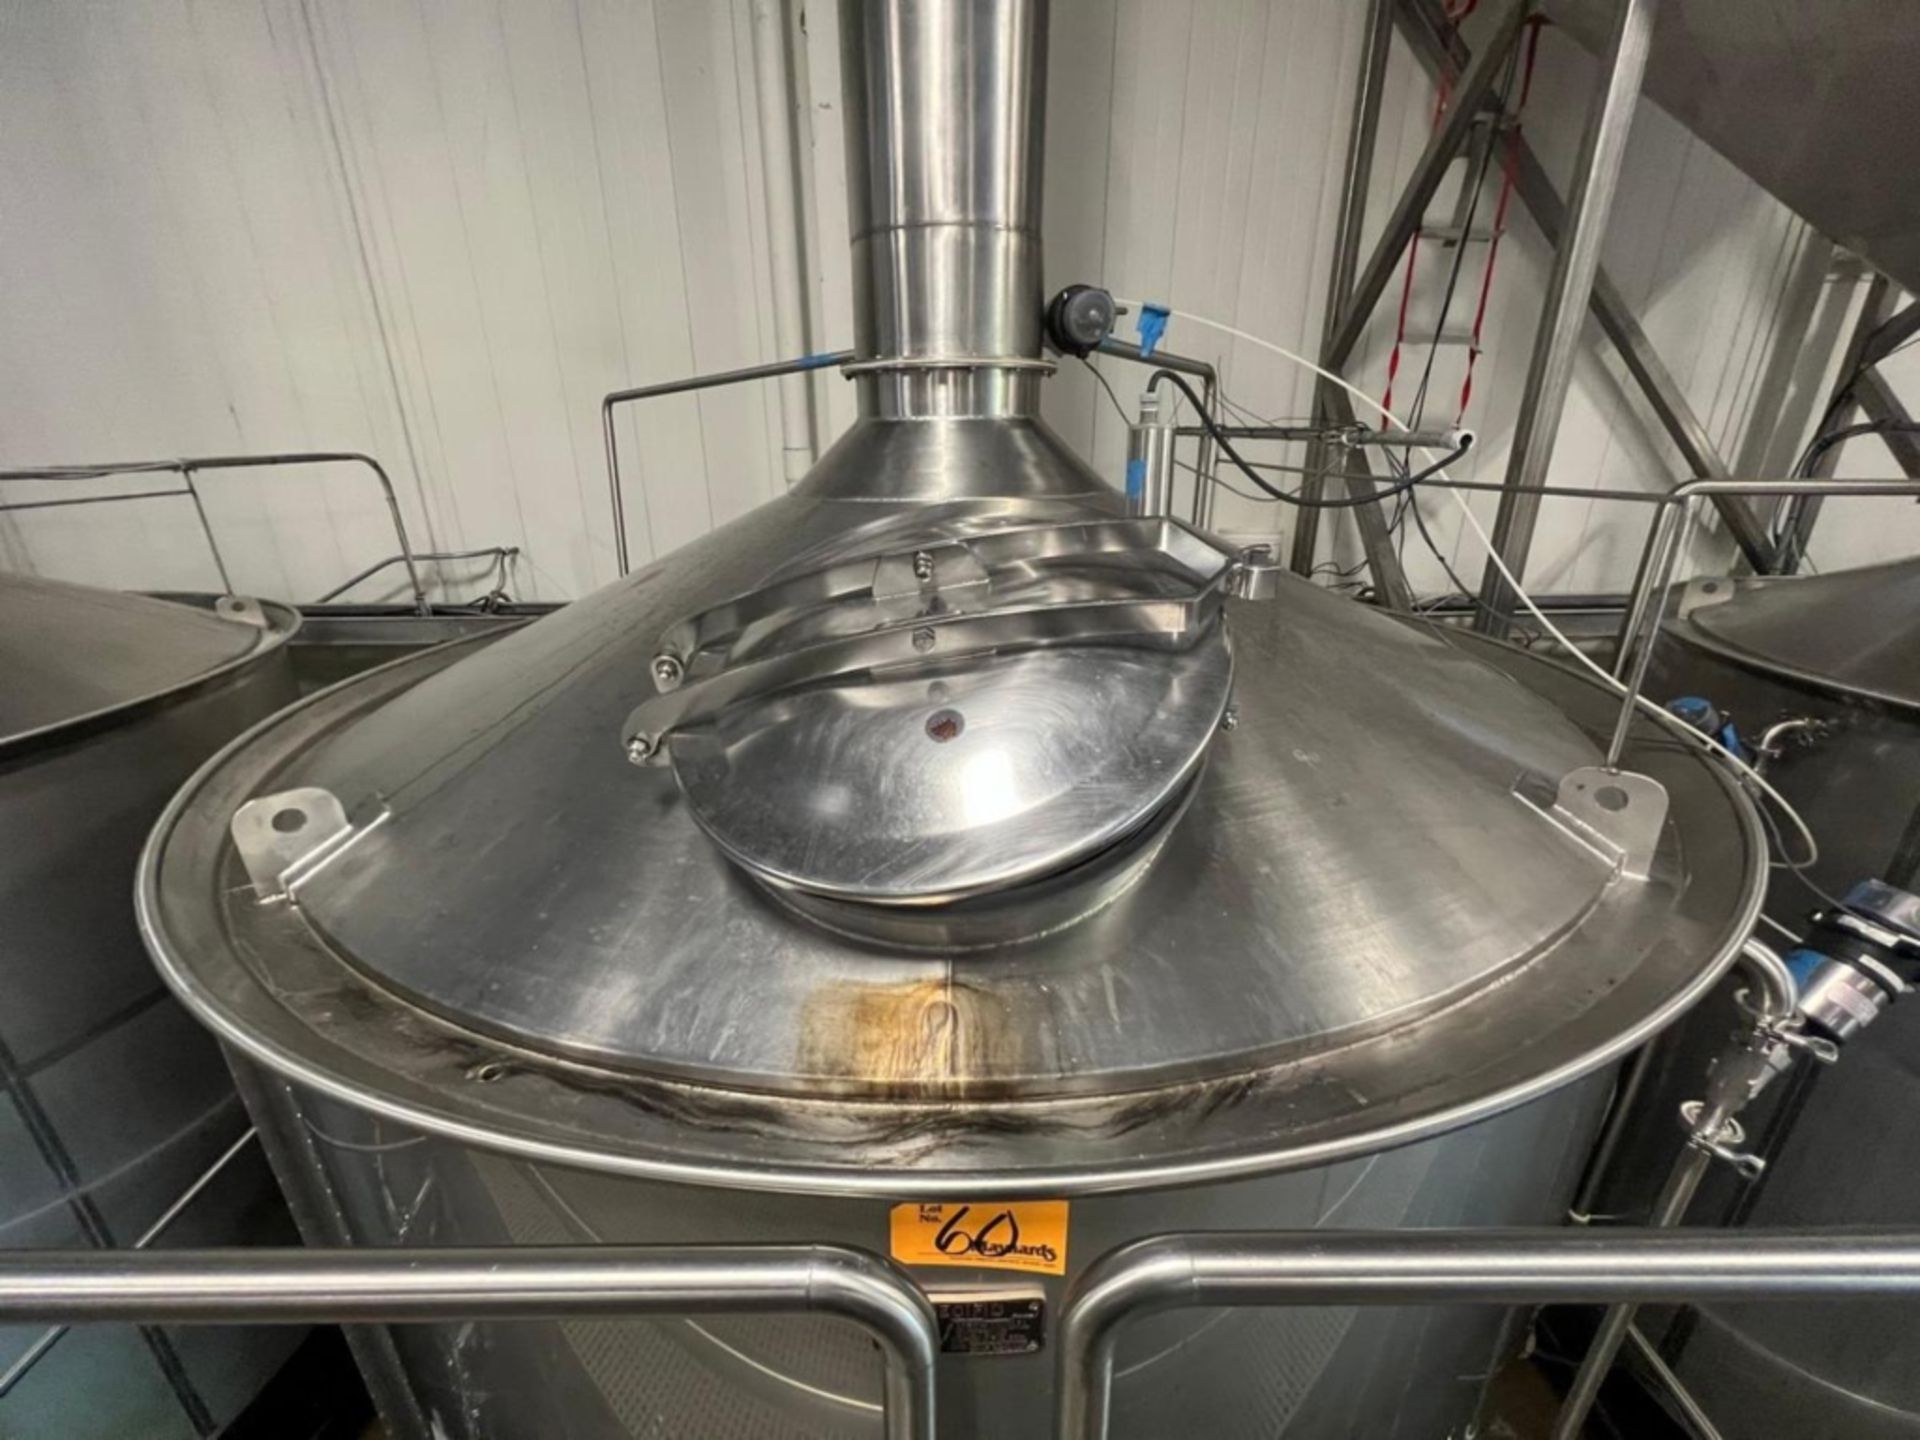 2012 Specific Mechanical Systems 72 BBL S/S Brew Kettle, S/N RMP-136-12, Aprox. 93" Dia., Includes - Image 9 of 13